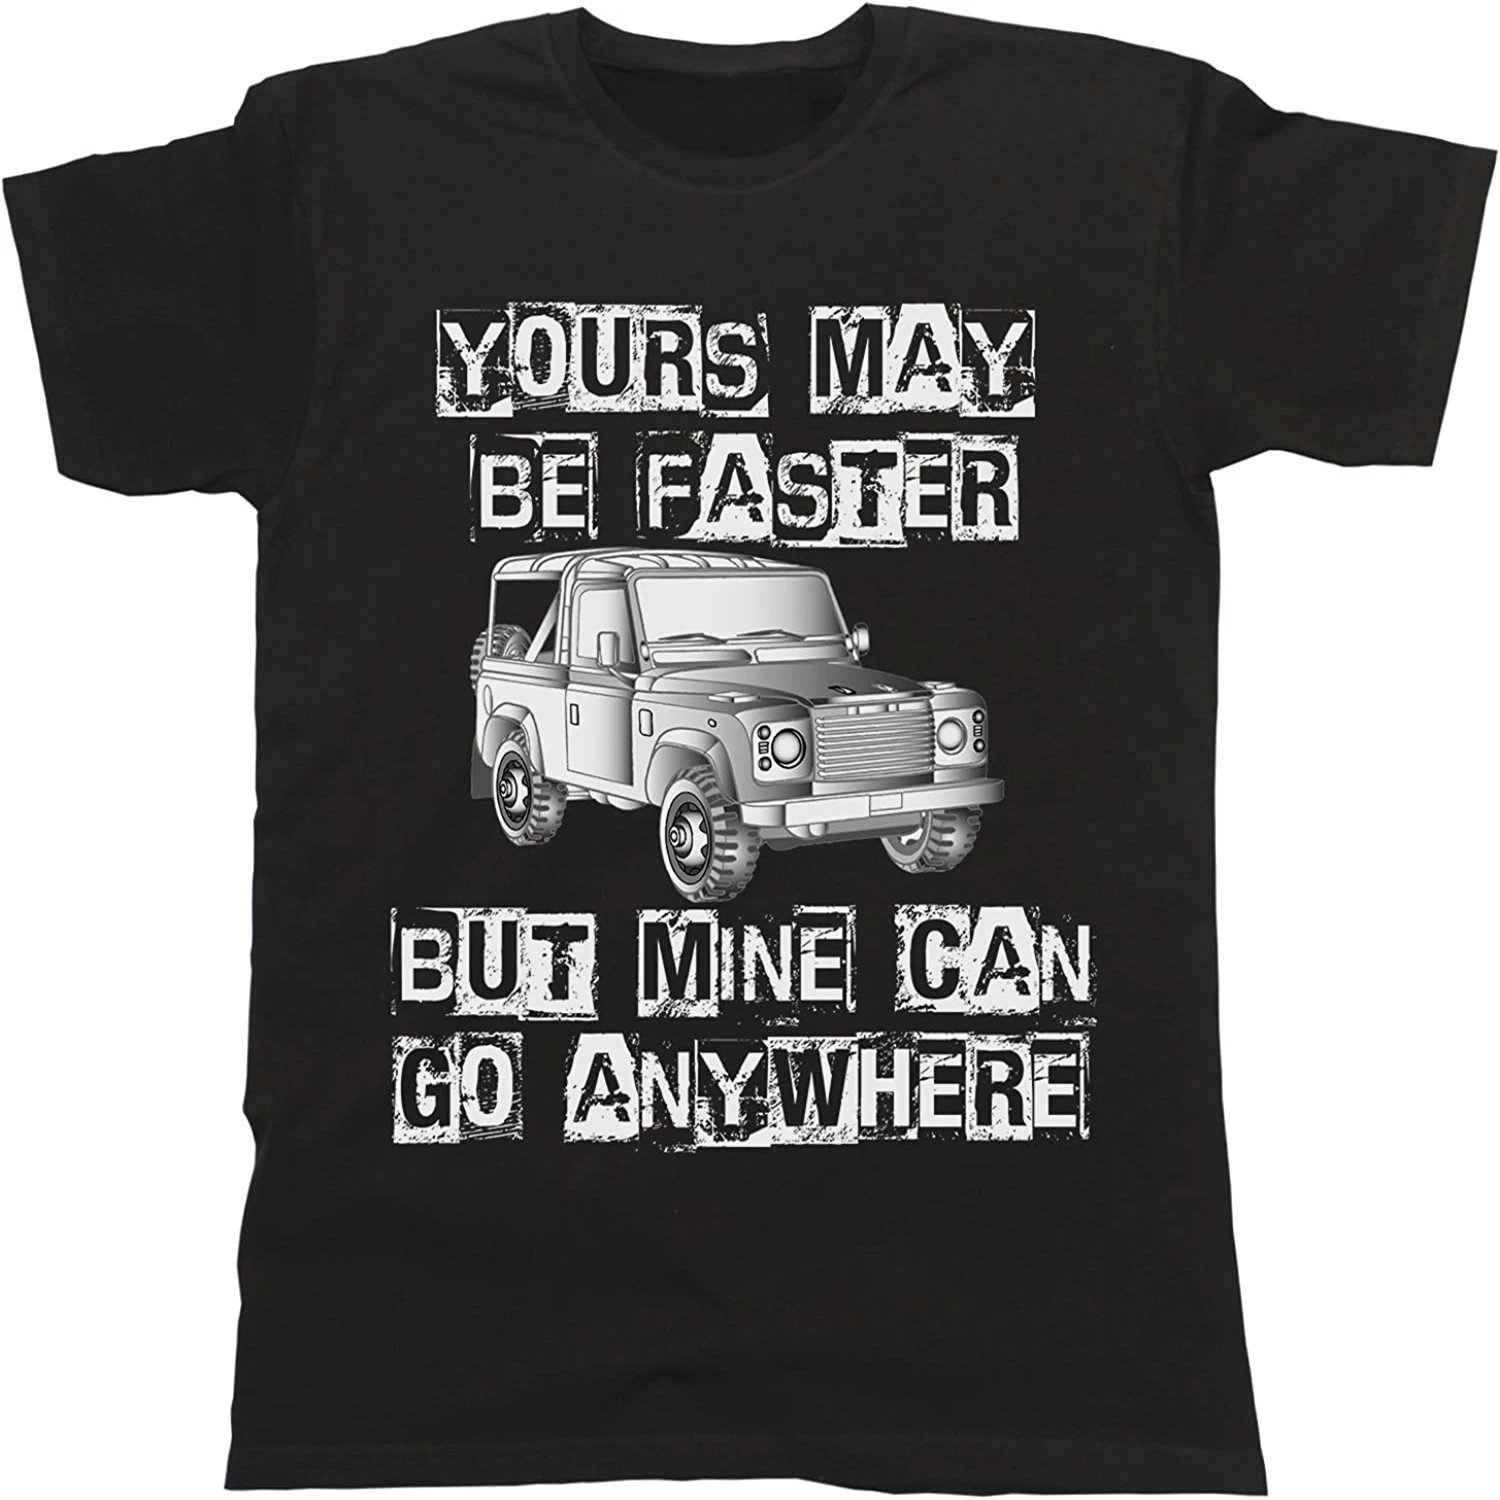 

Yours May Be Faster But Mine Can Go Anywhere - Cool Off Road 4x4 T-Shirt Men's 100% Cotton Casual T-shirts Loose Top Size S-3XL